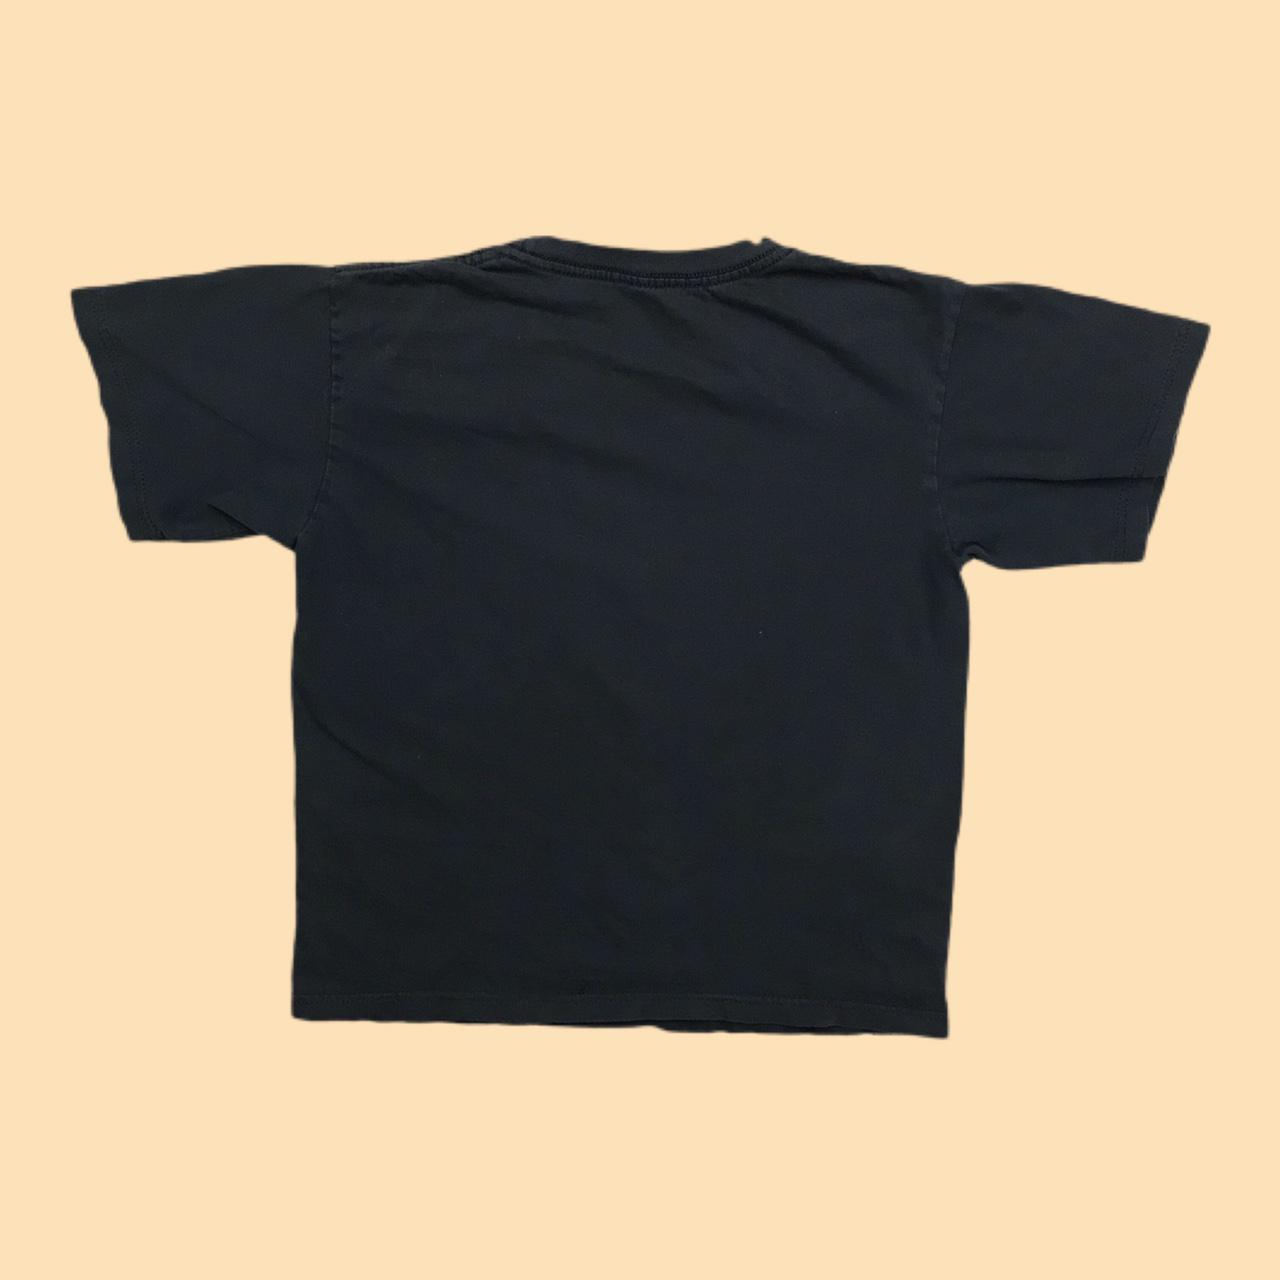 Product Image 3 - Black cropped t-shirt with silver